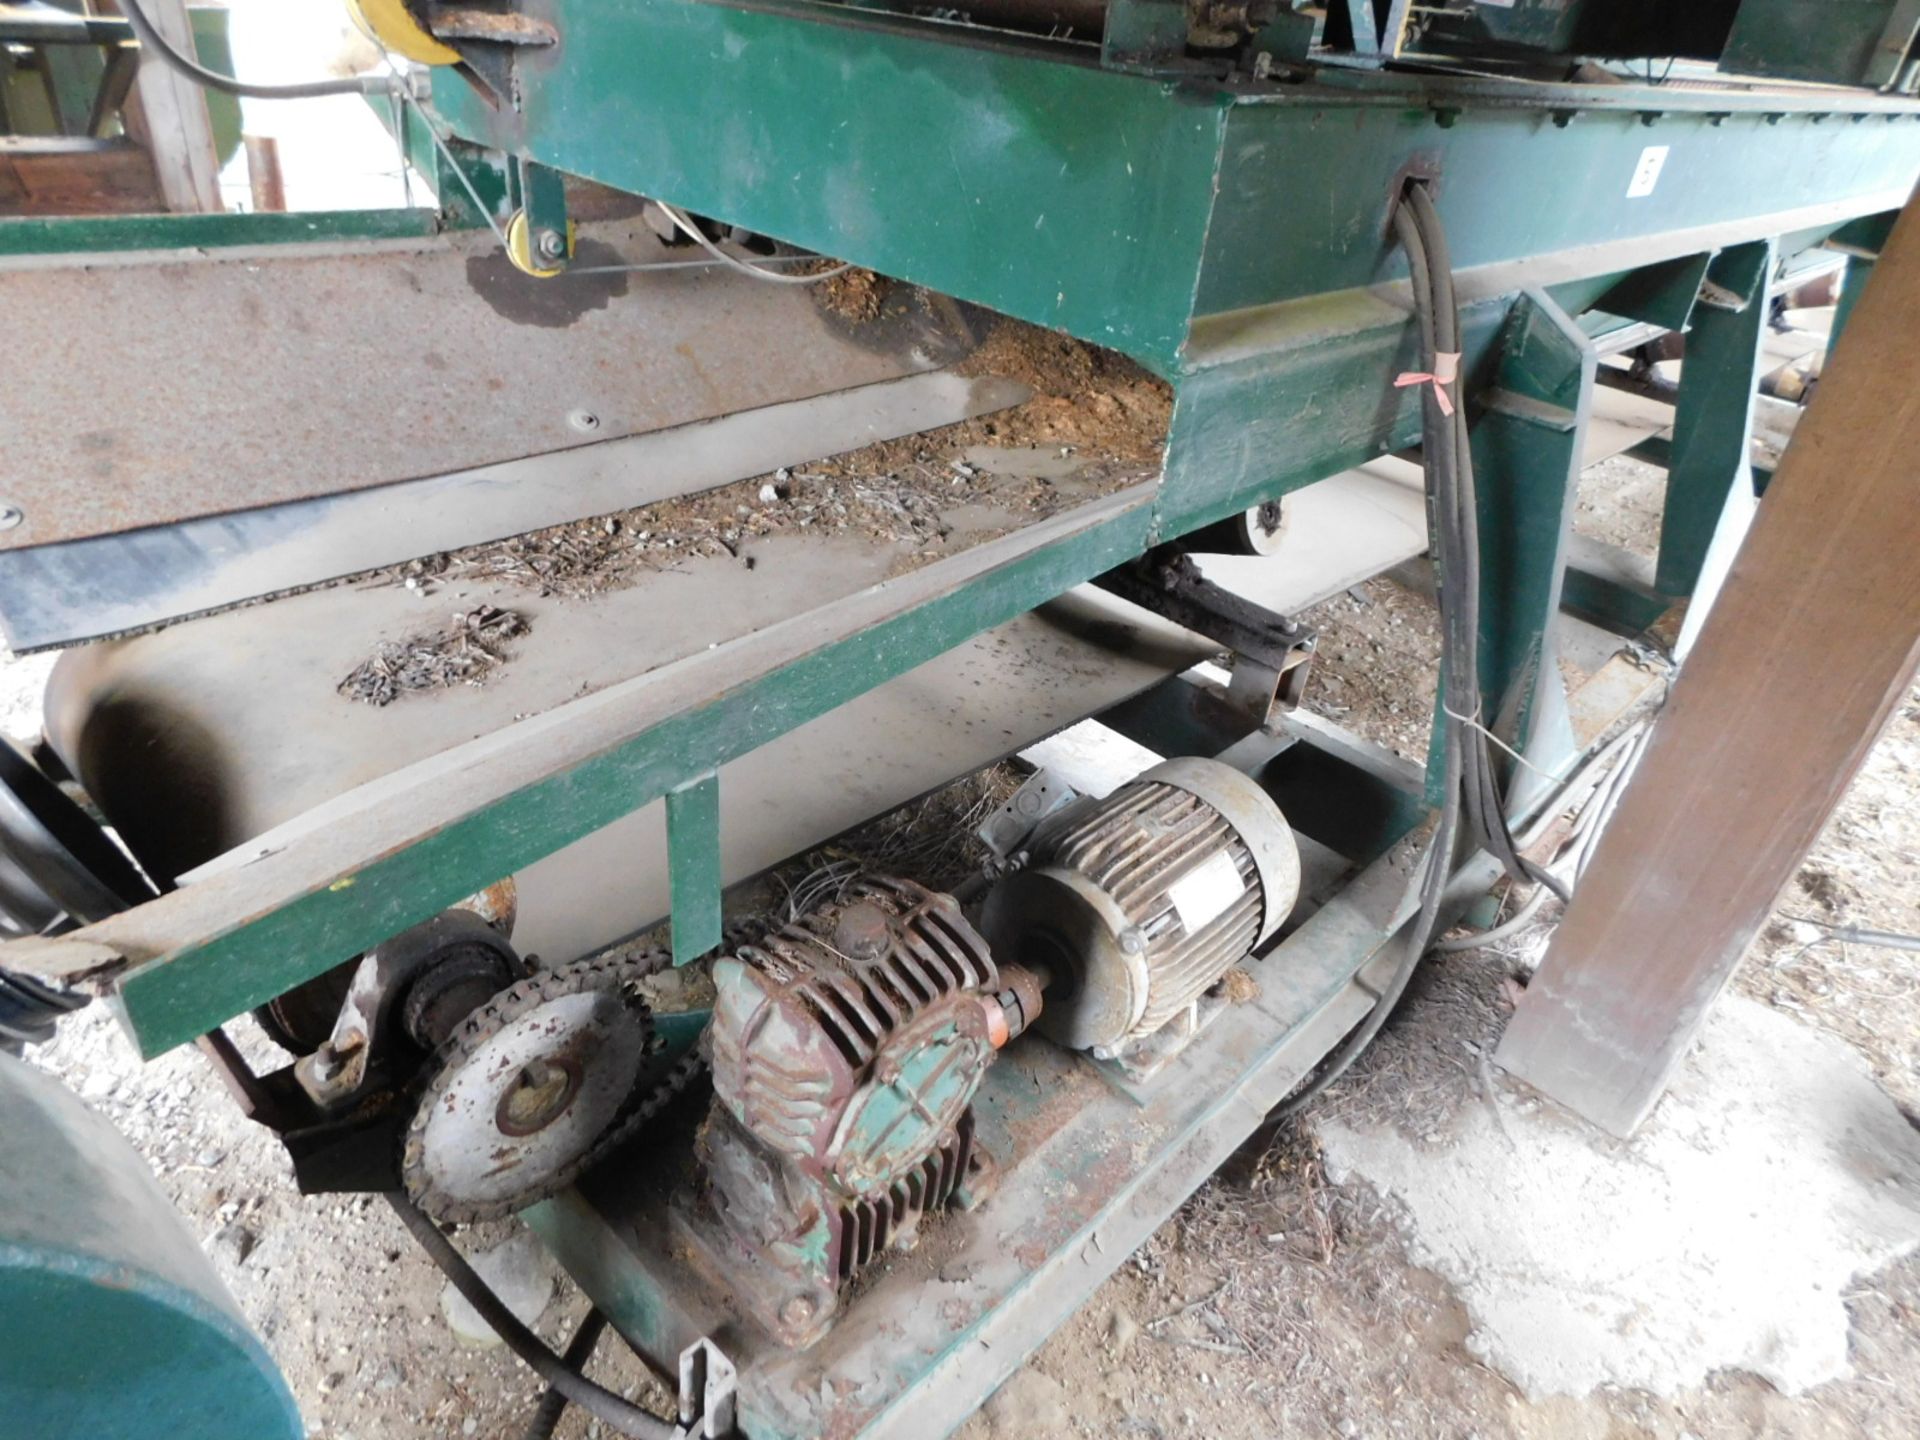 LOG LATHE SYSTEM: UP TO 48" X 30' LOG, (2) ADJUSTABLE CUTTER HEADS, 5HP, 460V, 1755RPM, HEAD CAN - Image 16 of 26